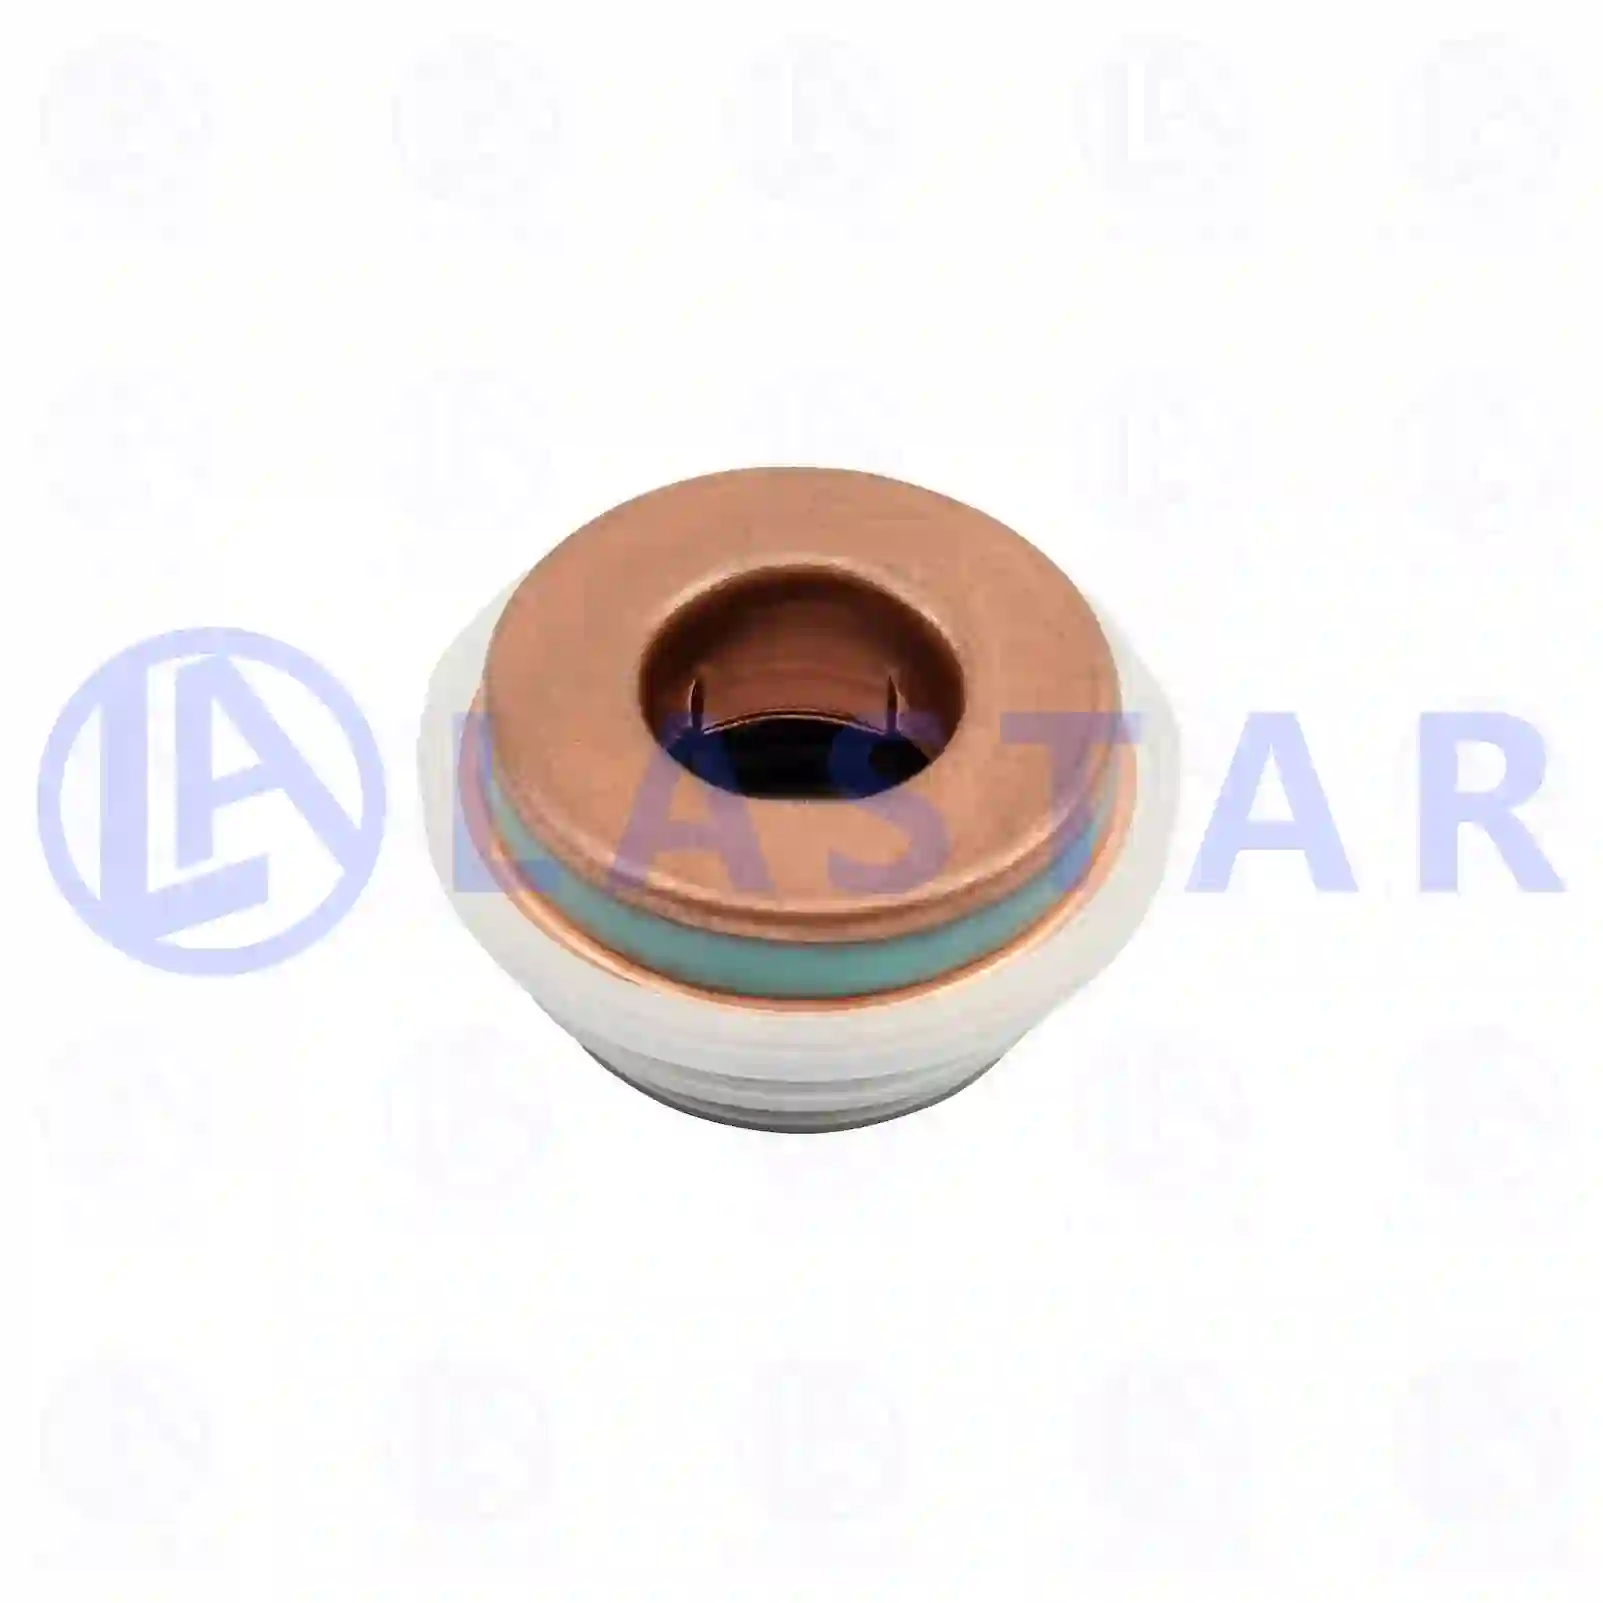 Slide ring seal, 77707710, 0002015719, 0002016719, 0002019219, 0002019819, 0002019919, 0012011719, 0012011919, 0012019819 ||  77707710 Lastar Spare Part | Truck Spare Parts, Auotomotive Spare Parts Slide ring seal, 77707710, 0002015719, 0002016719, 0002019219, 0002019819, 0002019919, 0012011719, 0012011919, 0012019819 ||  77707710 Lastar Spare Part | Truck Spare Parts, Auotomotive Spare Parts